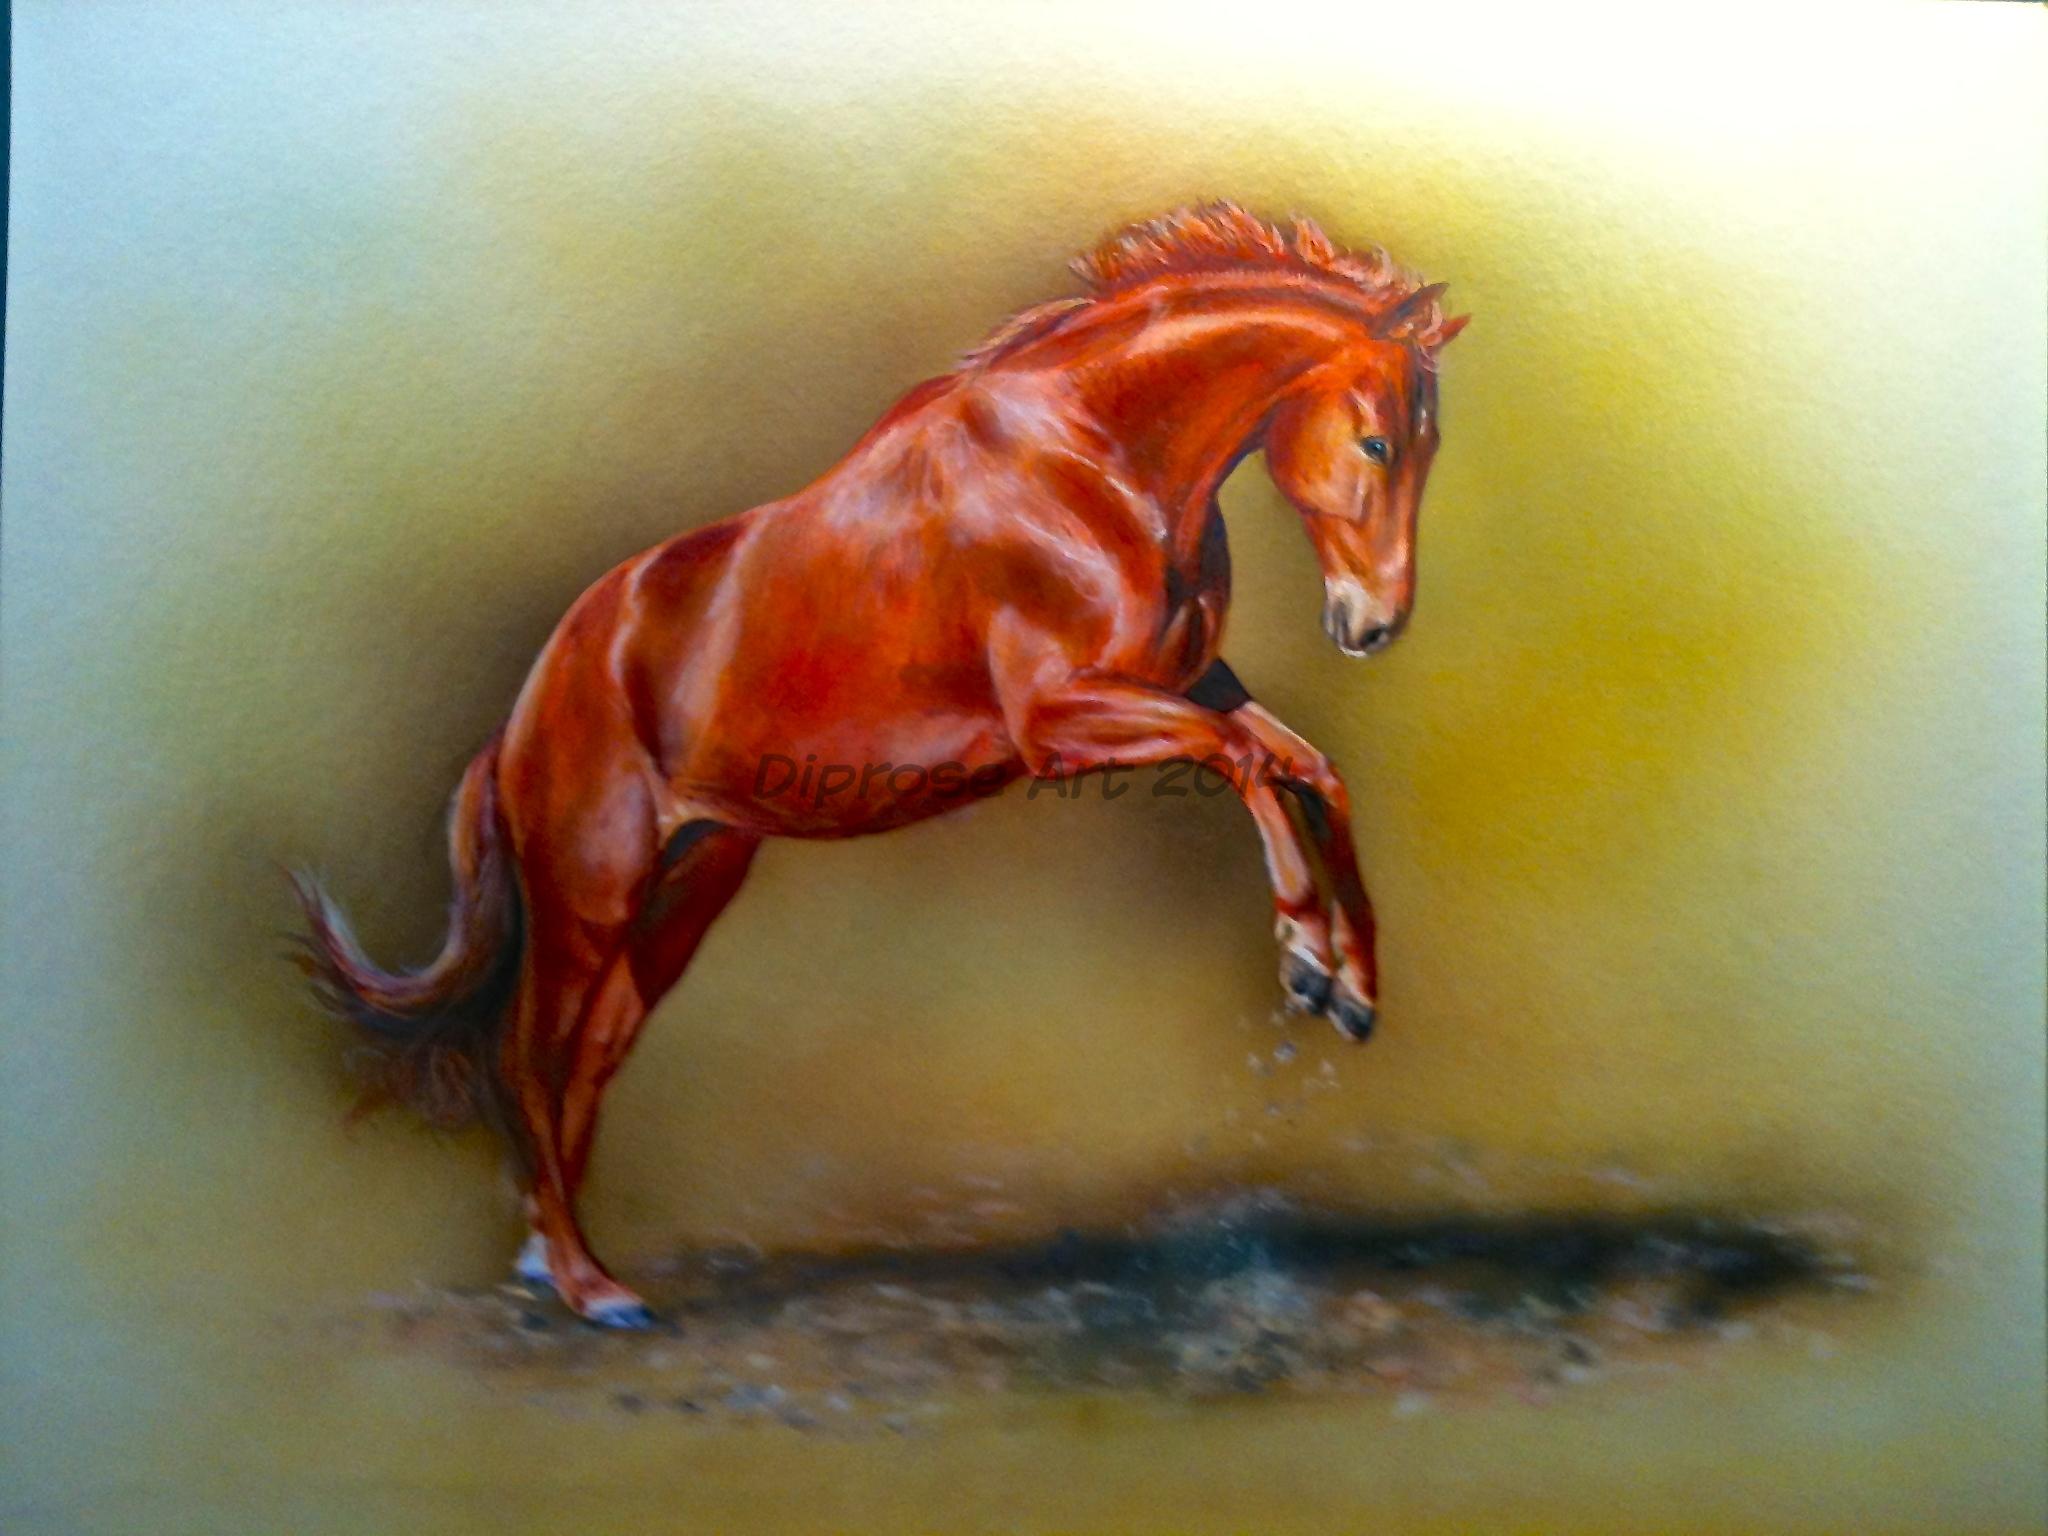 Acrylics on board - approx A3 - horse portrait - Indi is a talented and very athletic chestnut gelding.  When we free schooled him for his photos he put on a very lively performance and thoroughly enjoyed himself.